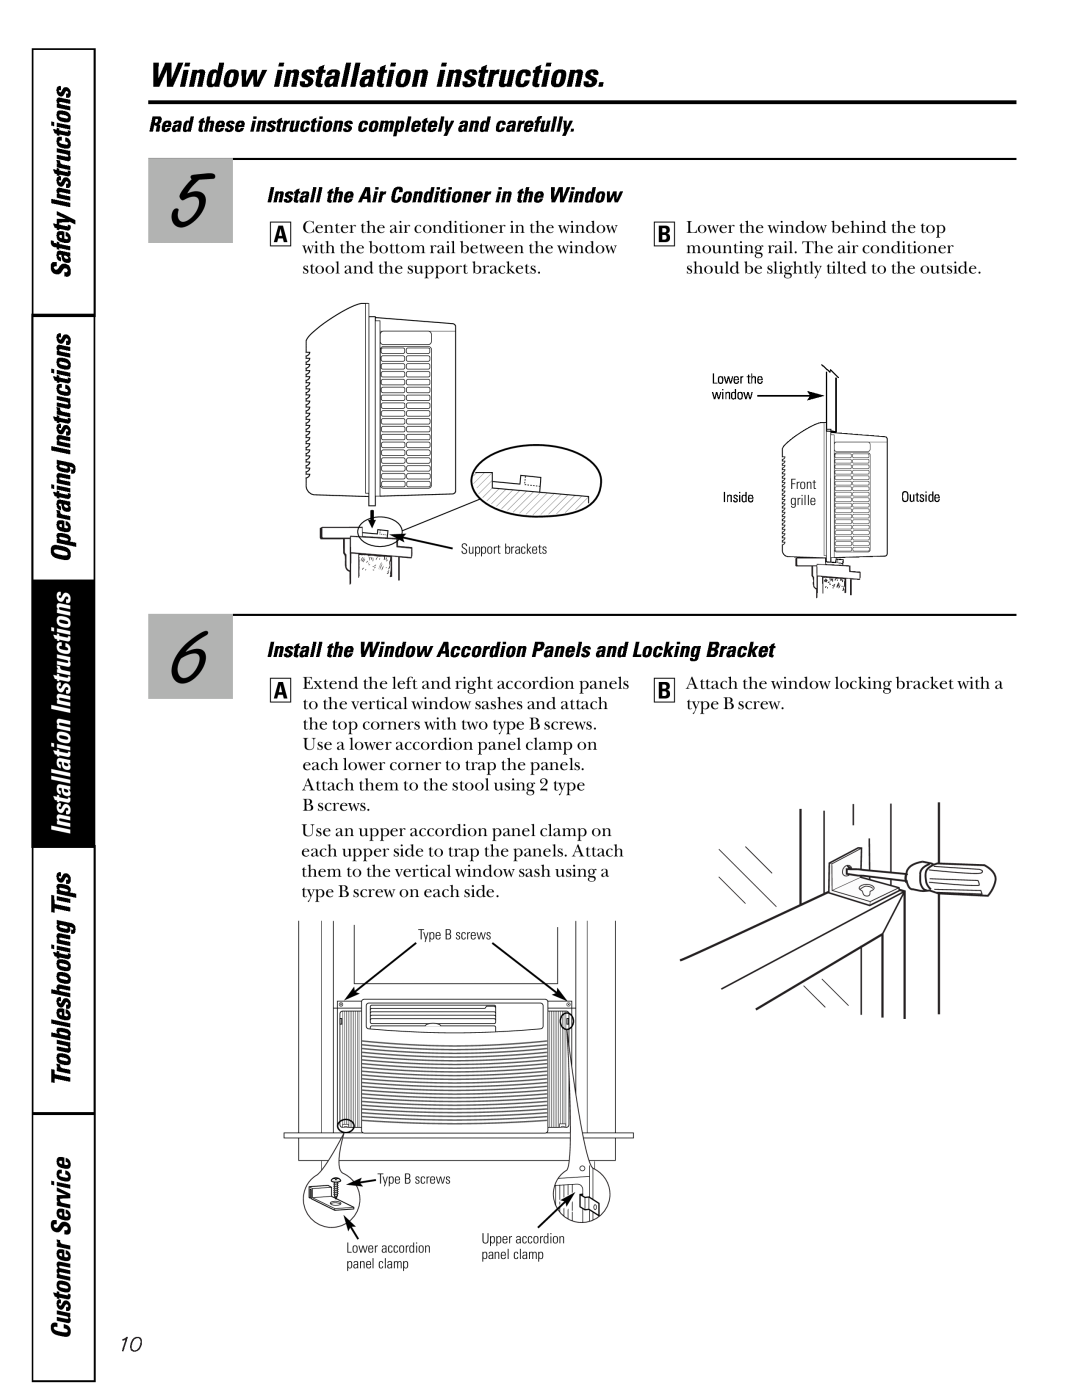 LG Electronics ASC05 Install the Air Conditioner in the Window, Window installation instructions, CustomerService 